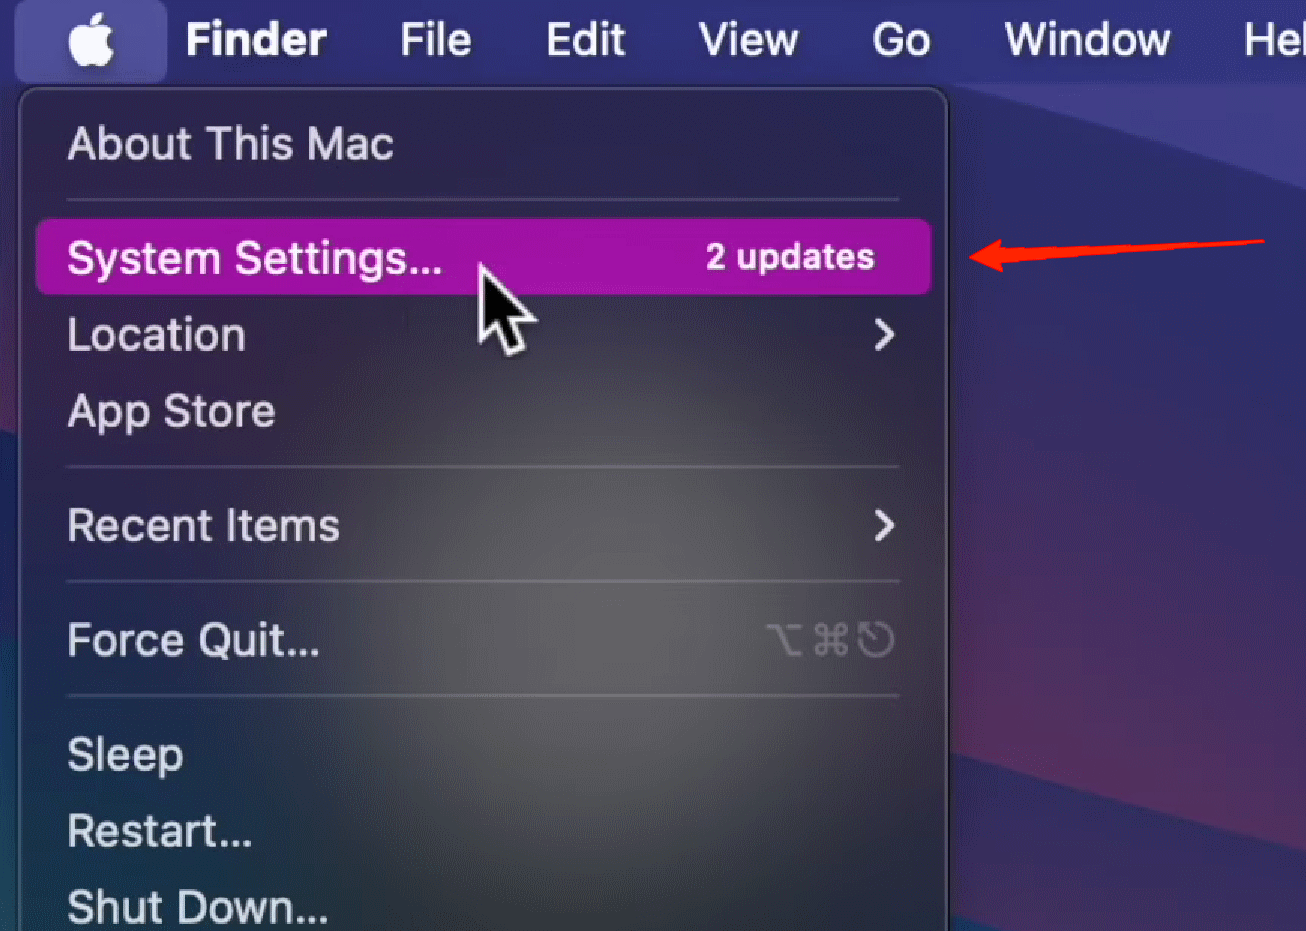 Apple icon on the top menu bar and select System Settings